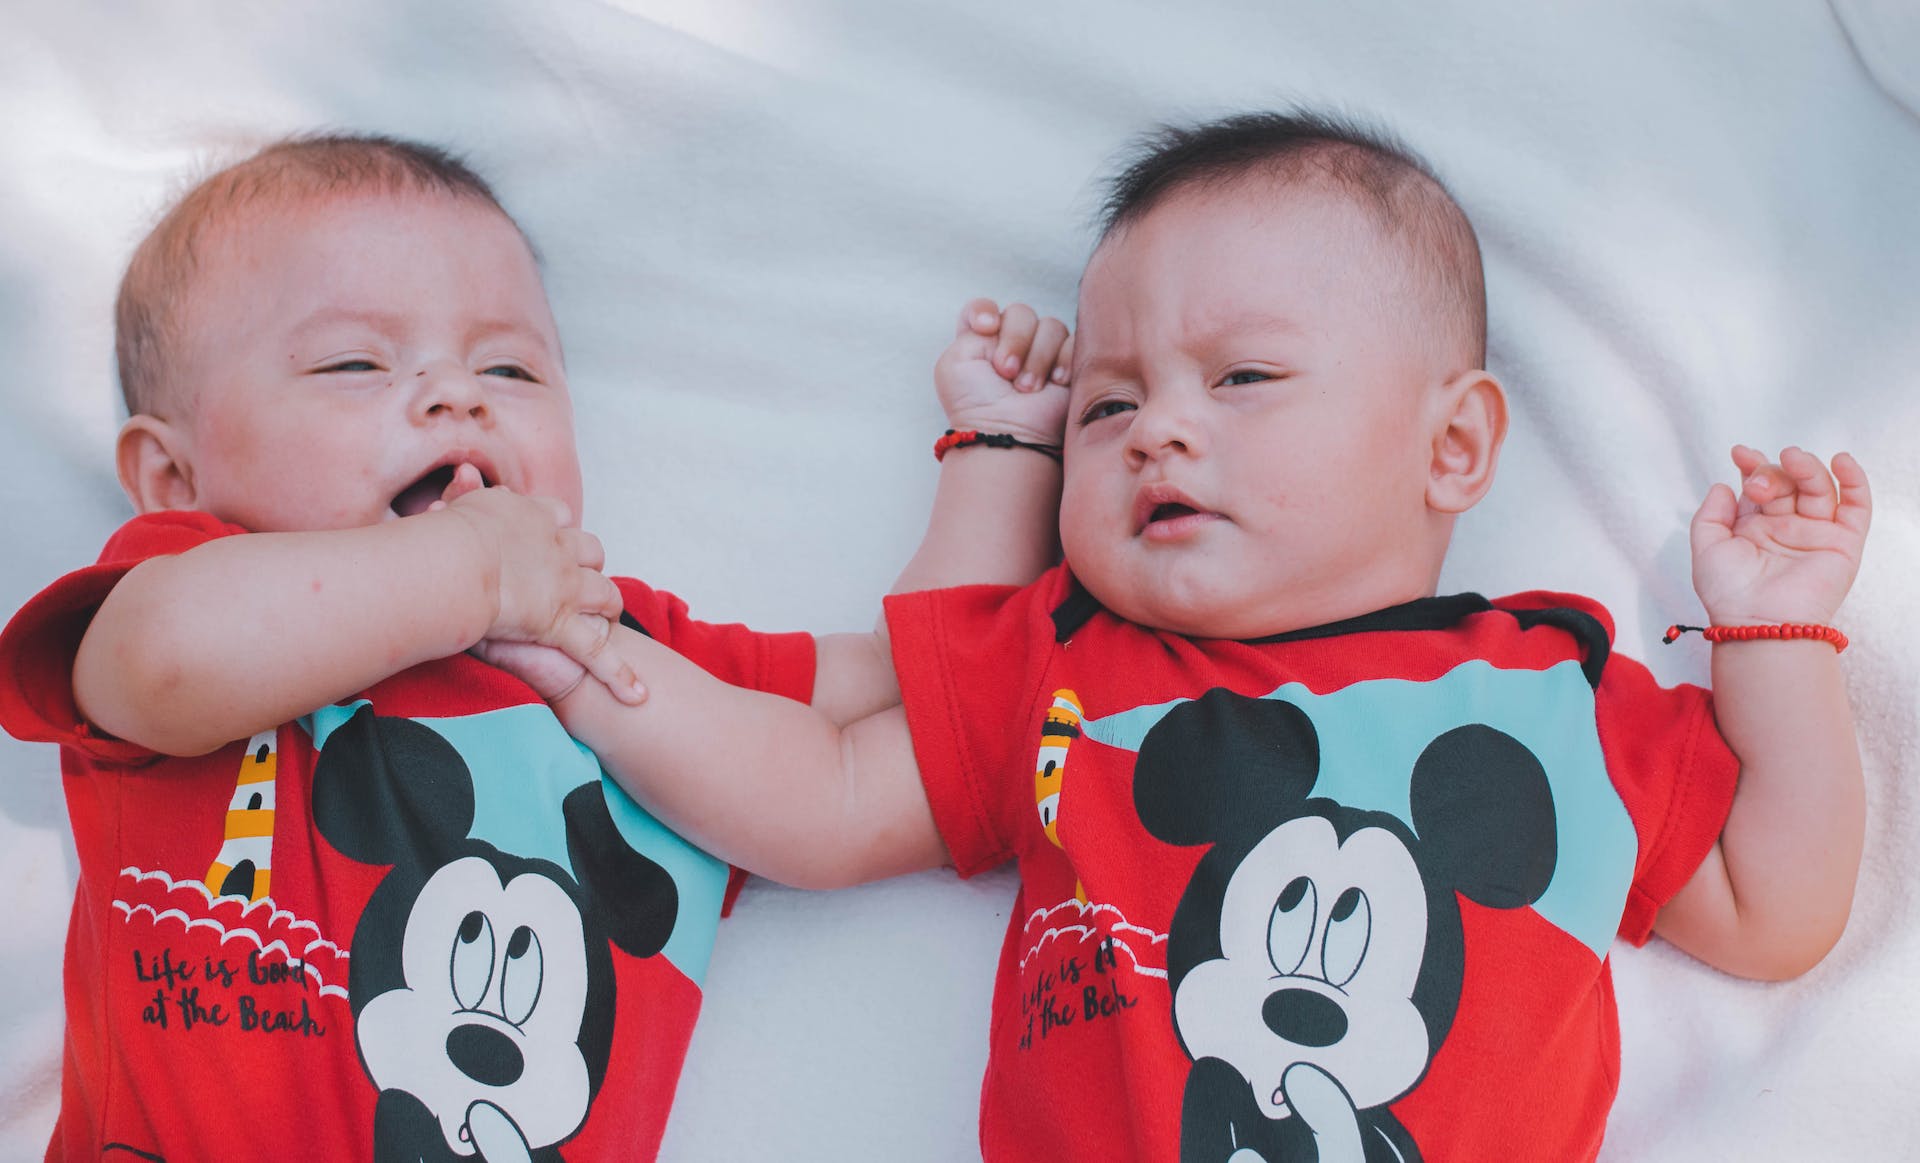 Babies wearing red Mickey Mouse Shirts | Source: Pexels